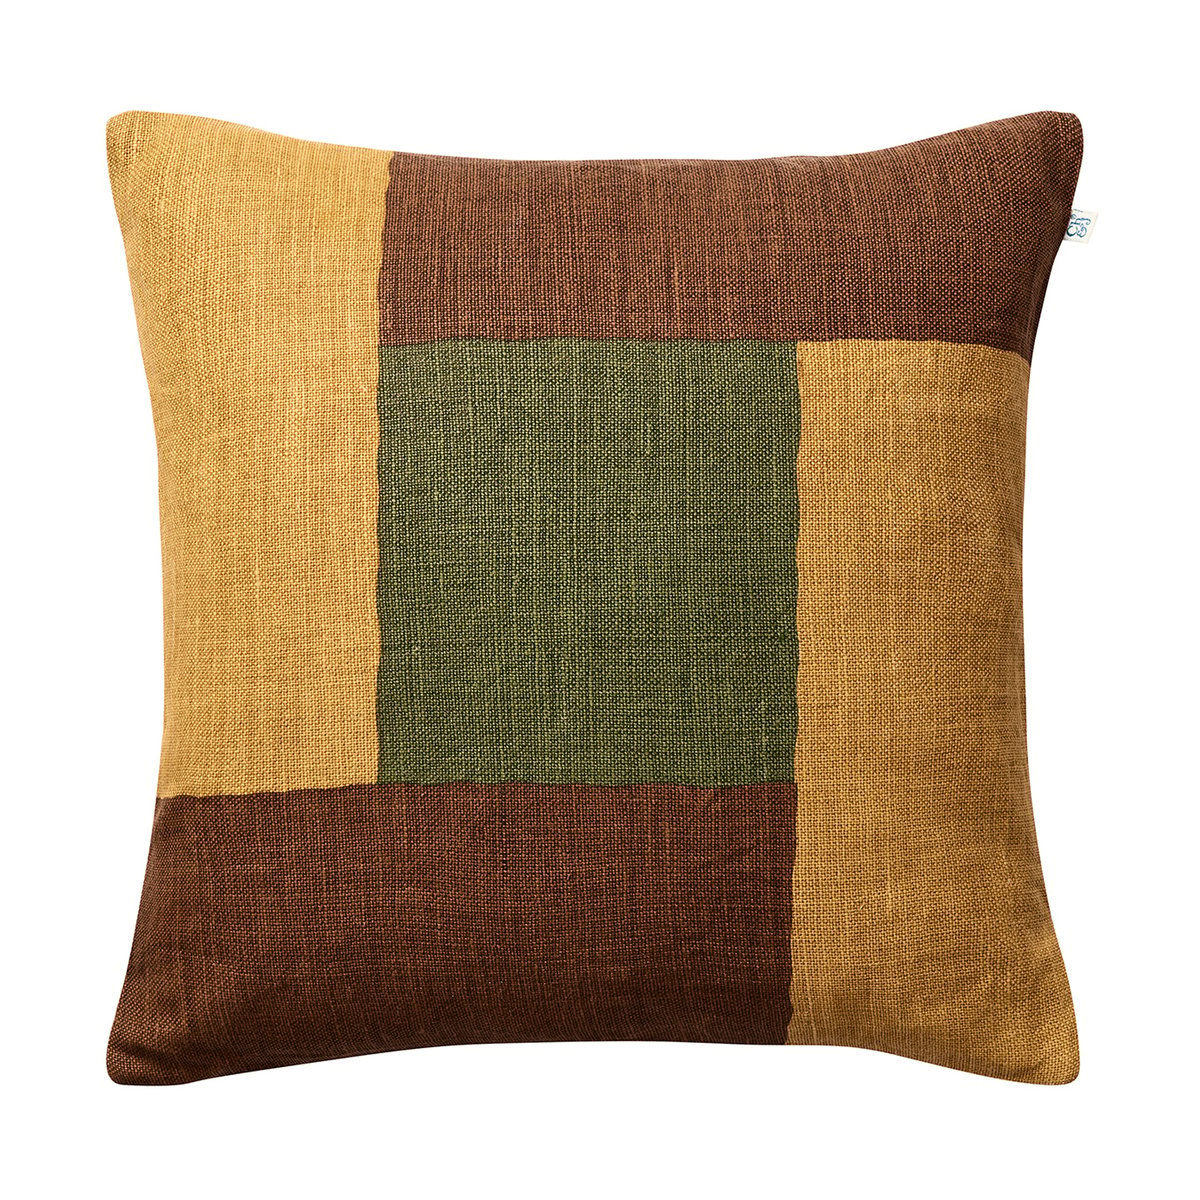 Chhatwal & Jonsson Halo pudebetræk 50×50 cm Taupe/Spicy Yellow/Cactus Green